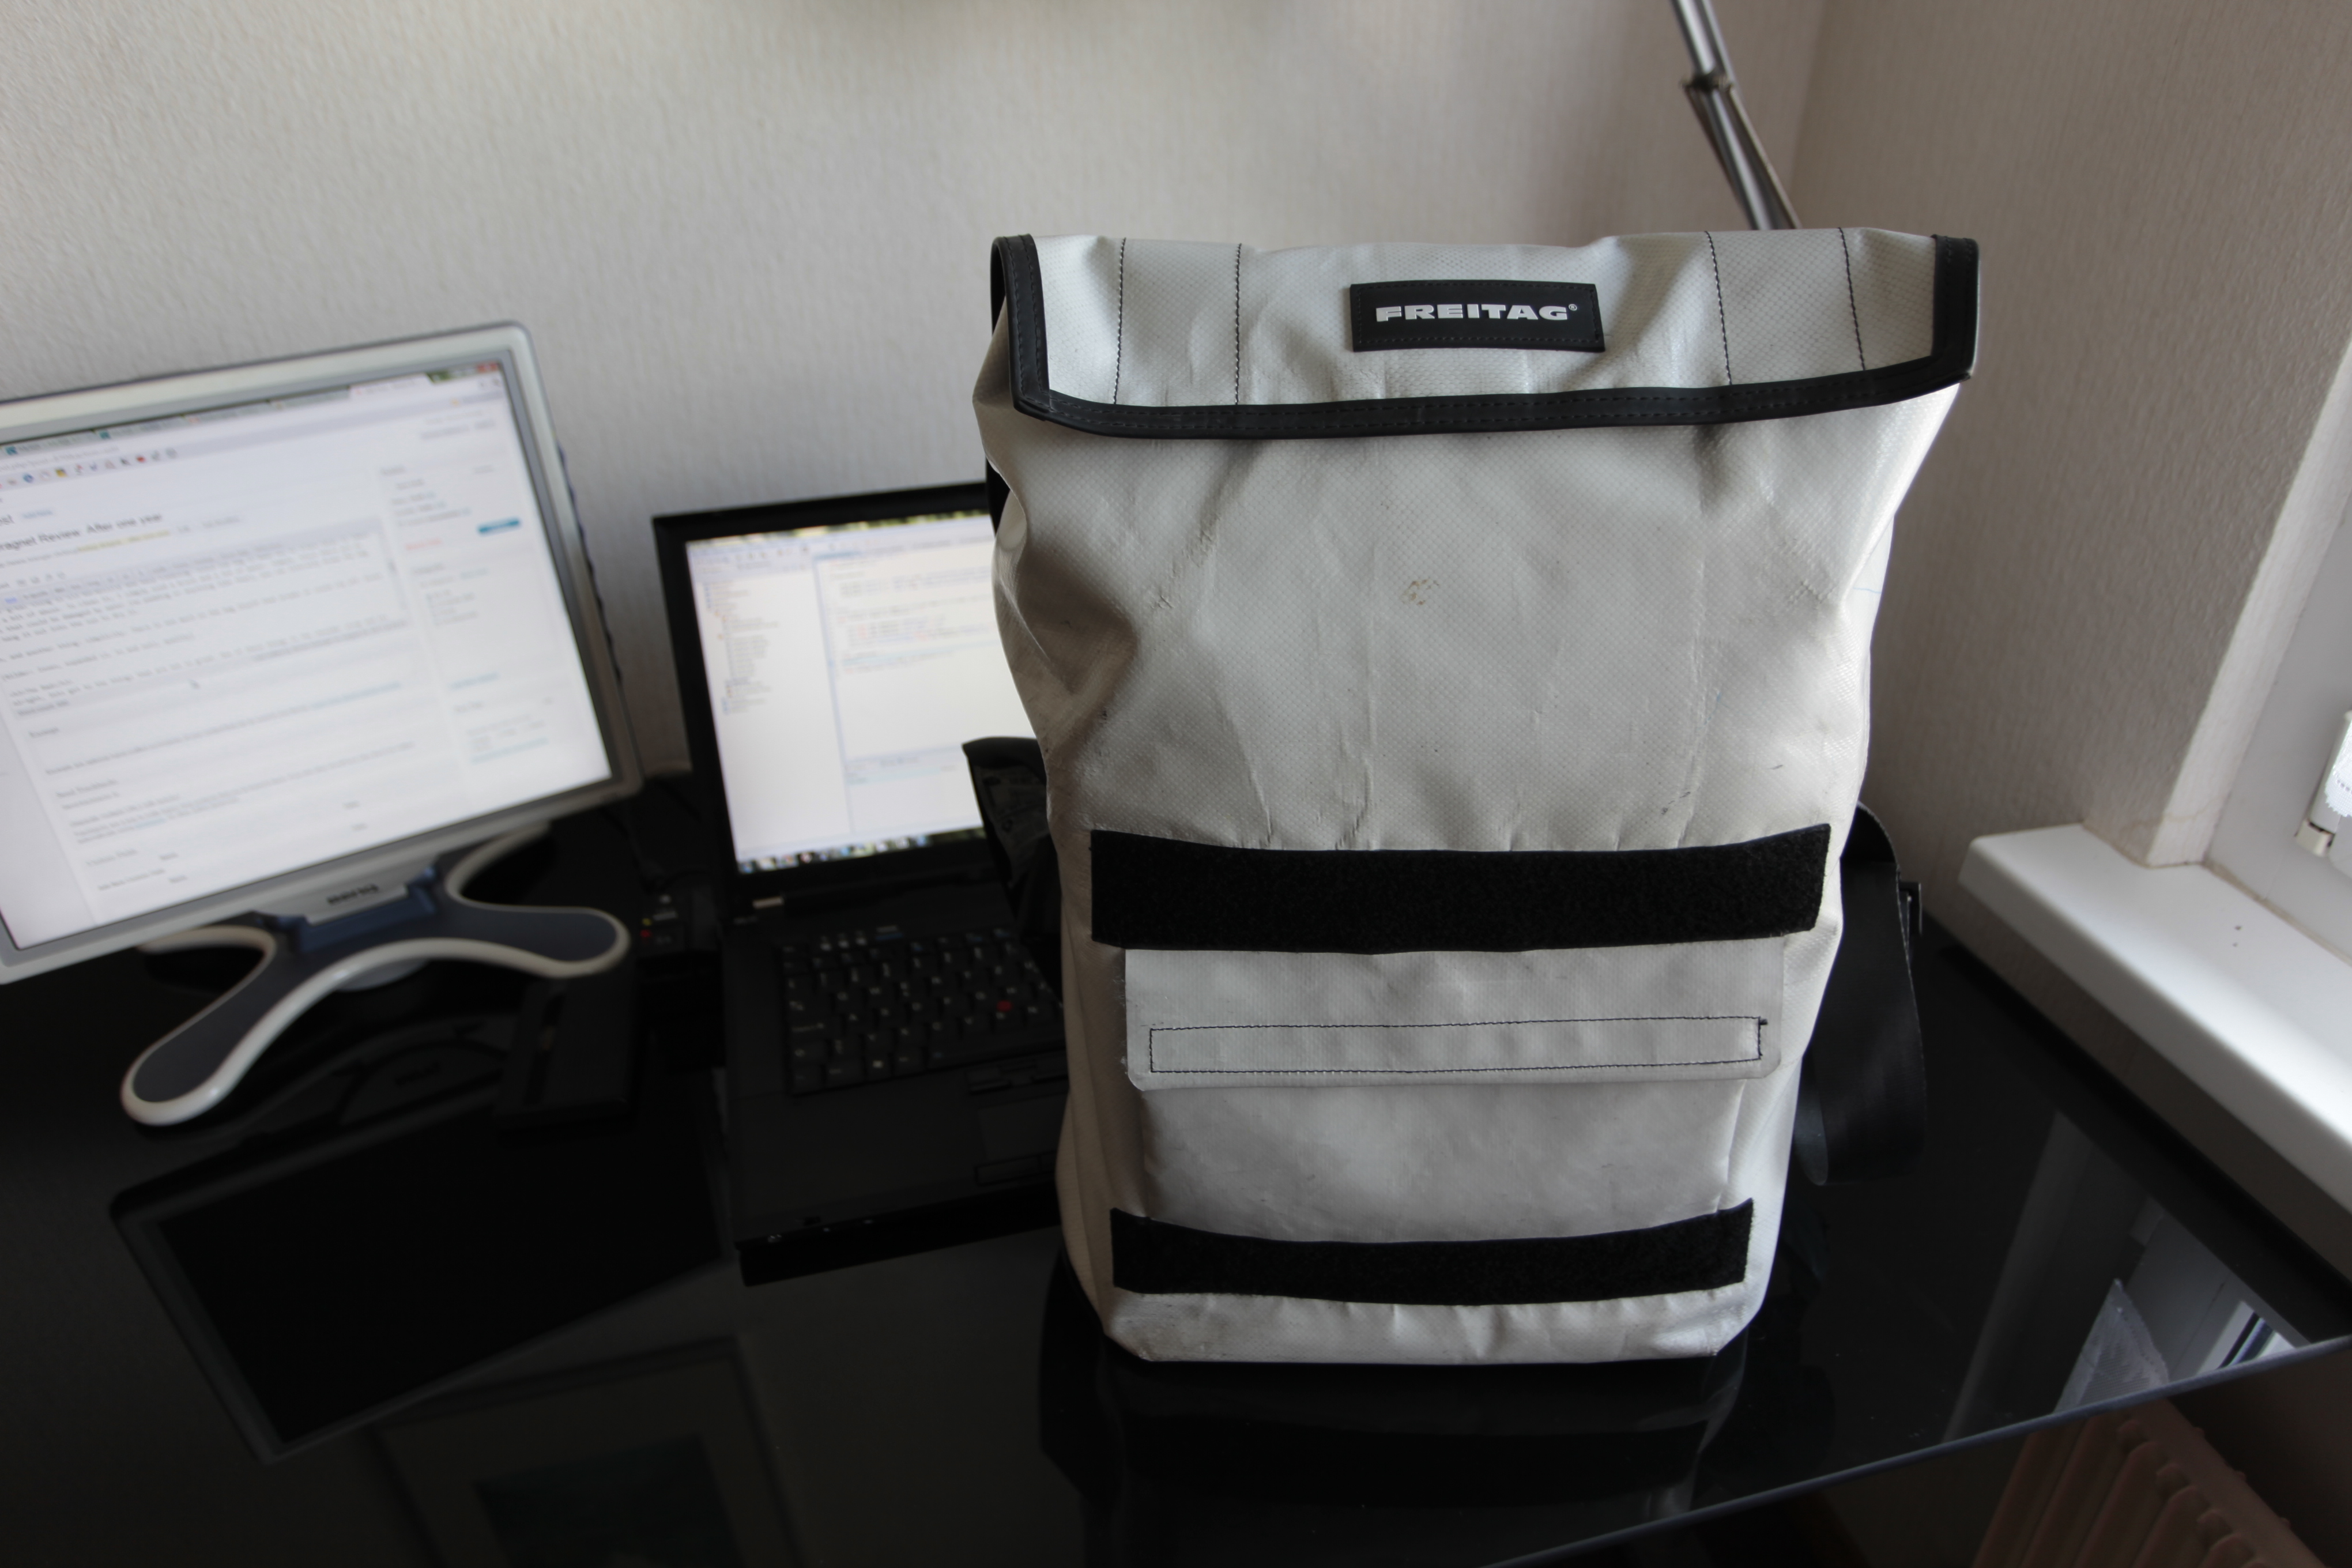 Photo showing the bag fully expanded